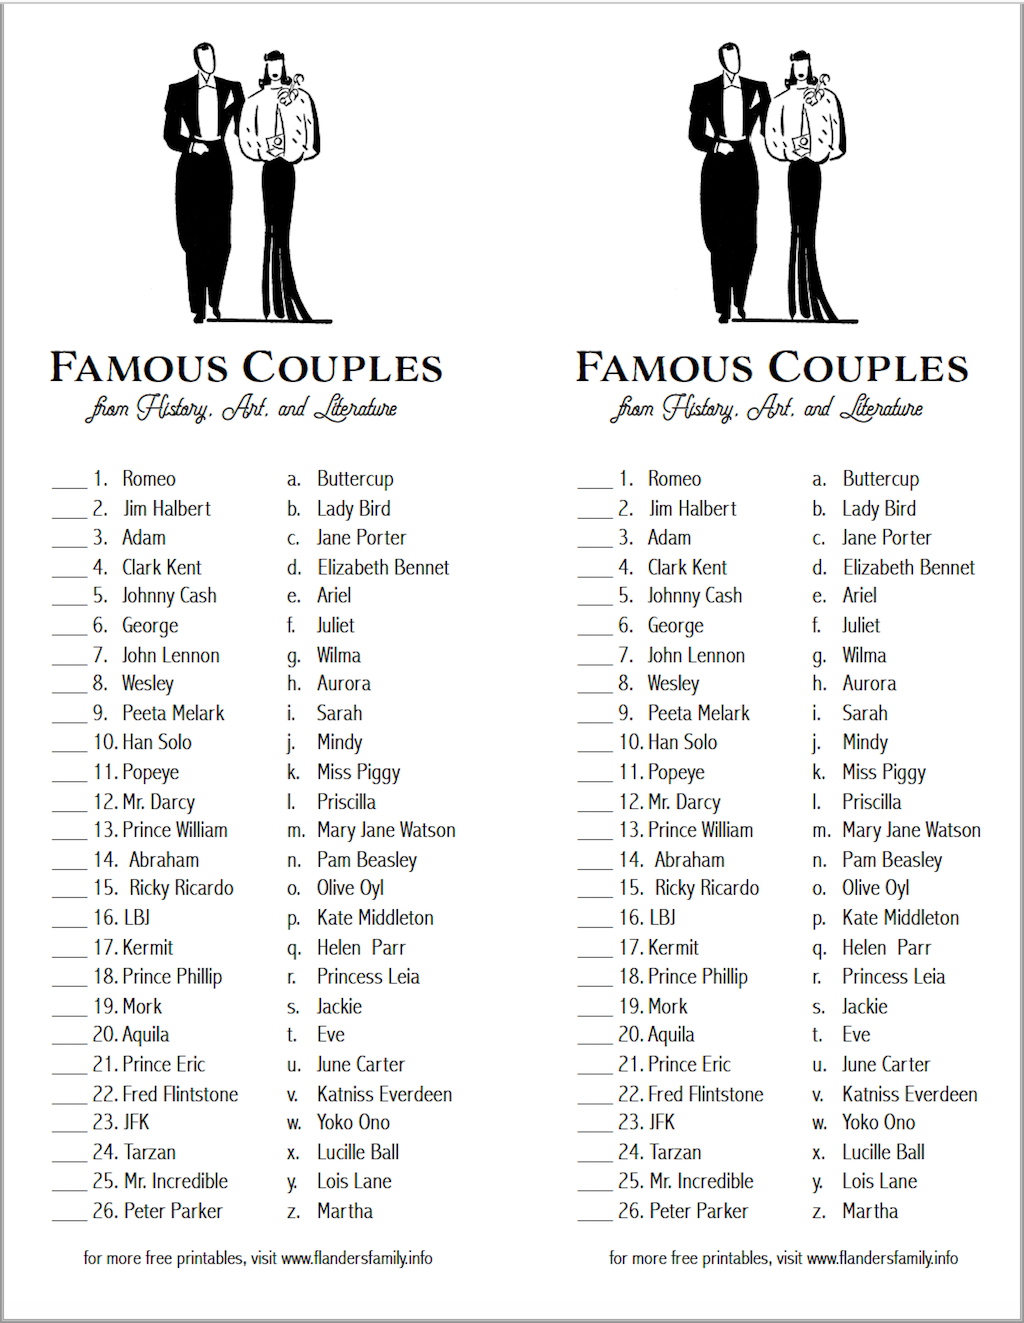 Can You Match These Famous Couples? (Free Printable) - Flanders - Free Printable Compatibility Test For Couples